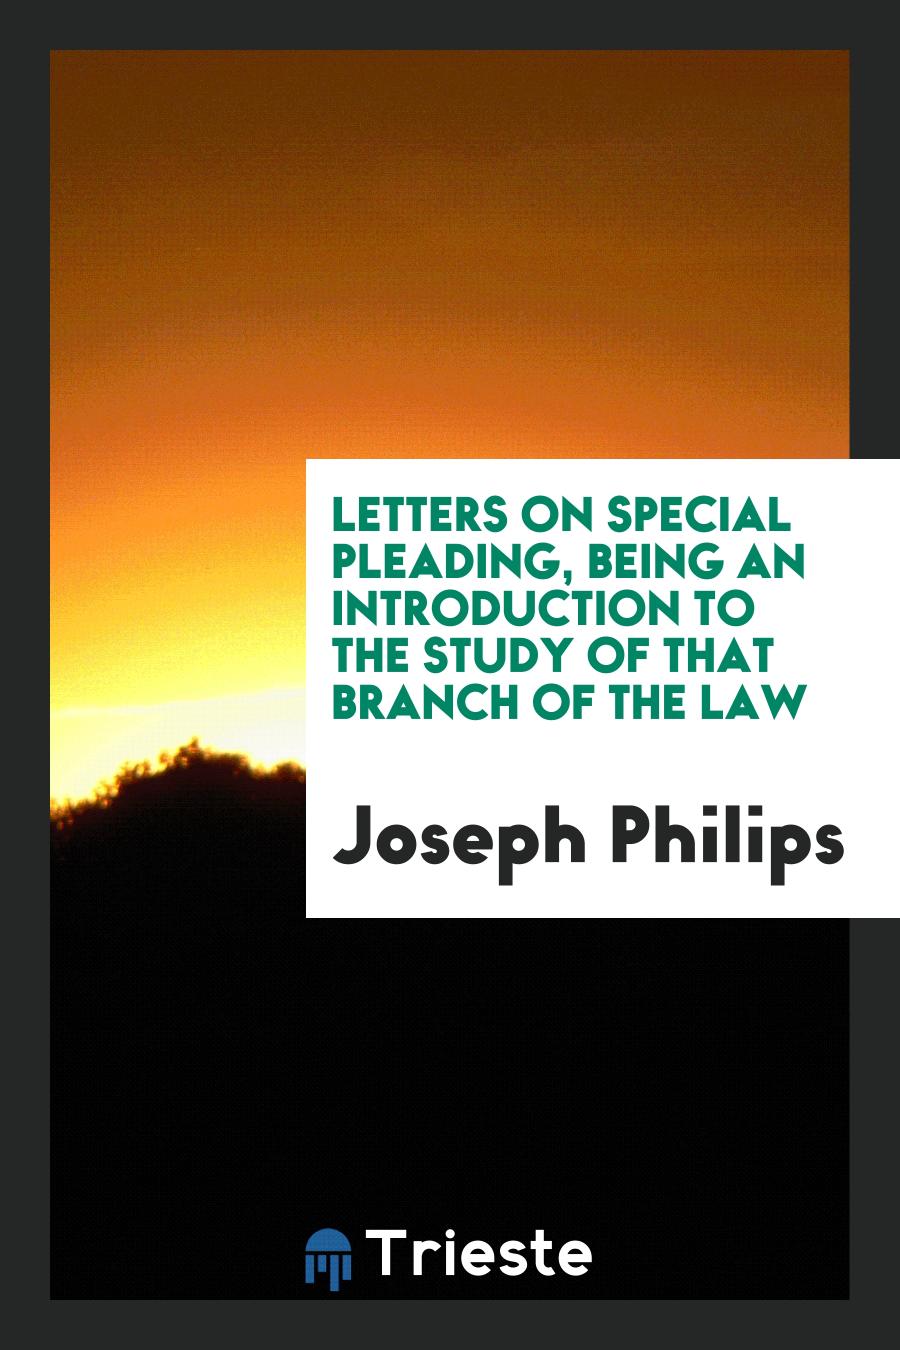 Letters on Special Pleading, Being an Introduction to the Study of that Branch of the Law